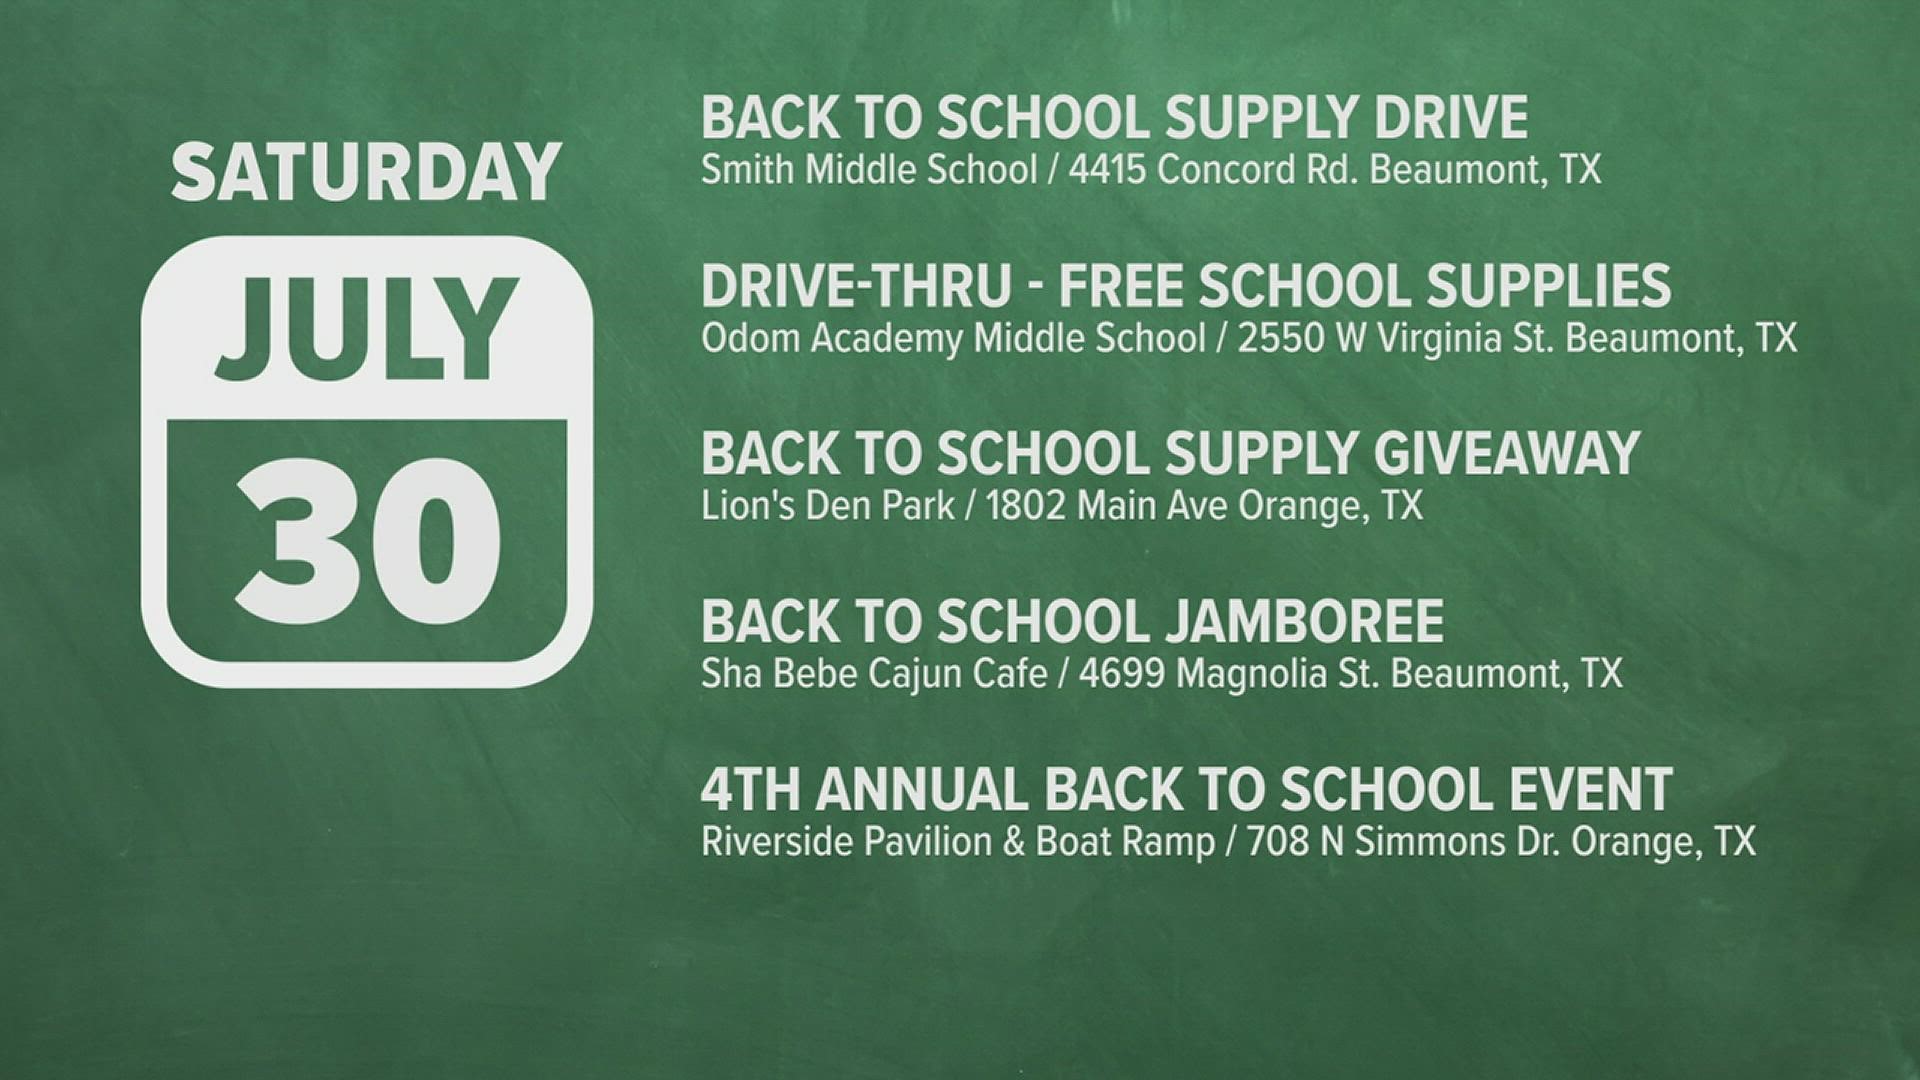 Several back-to-school events happening around Southeast Texas on Saturday will be giving away free school supplies to help ease the minds and wallets of parents.